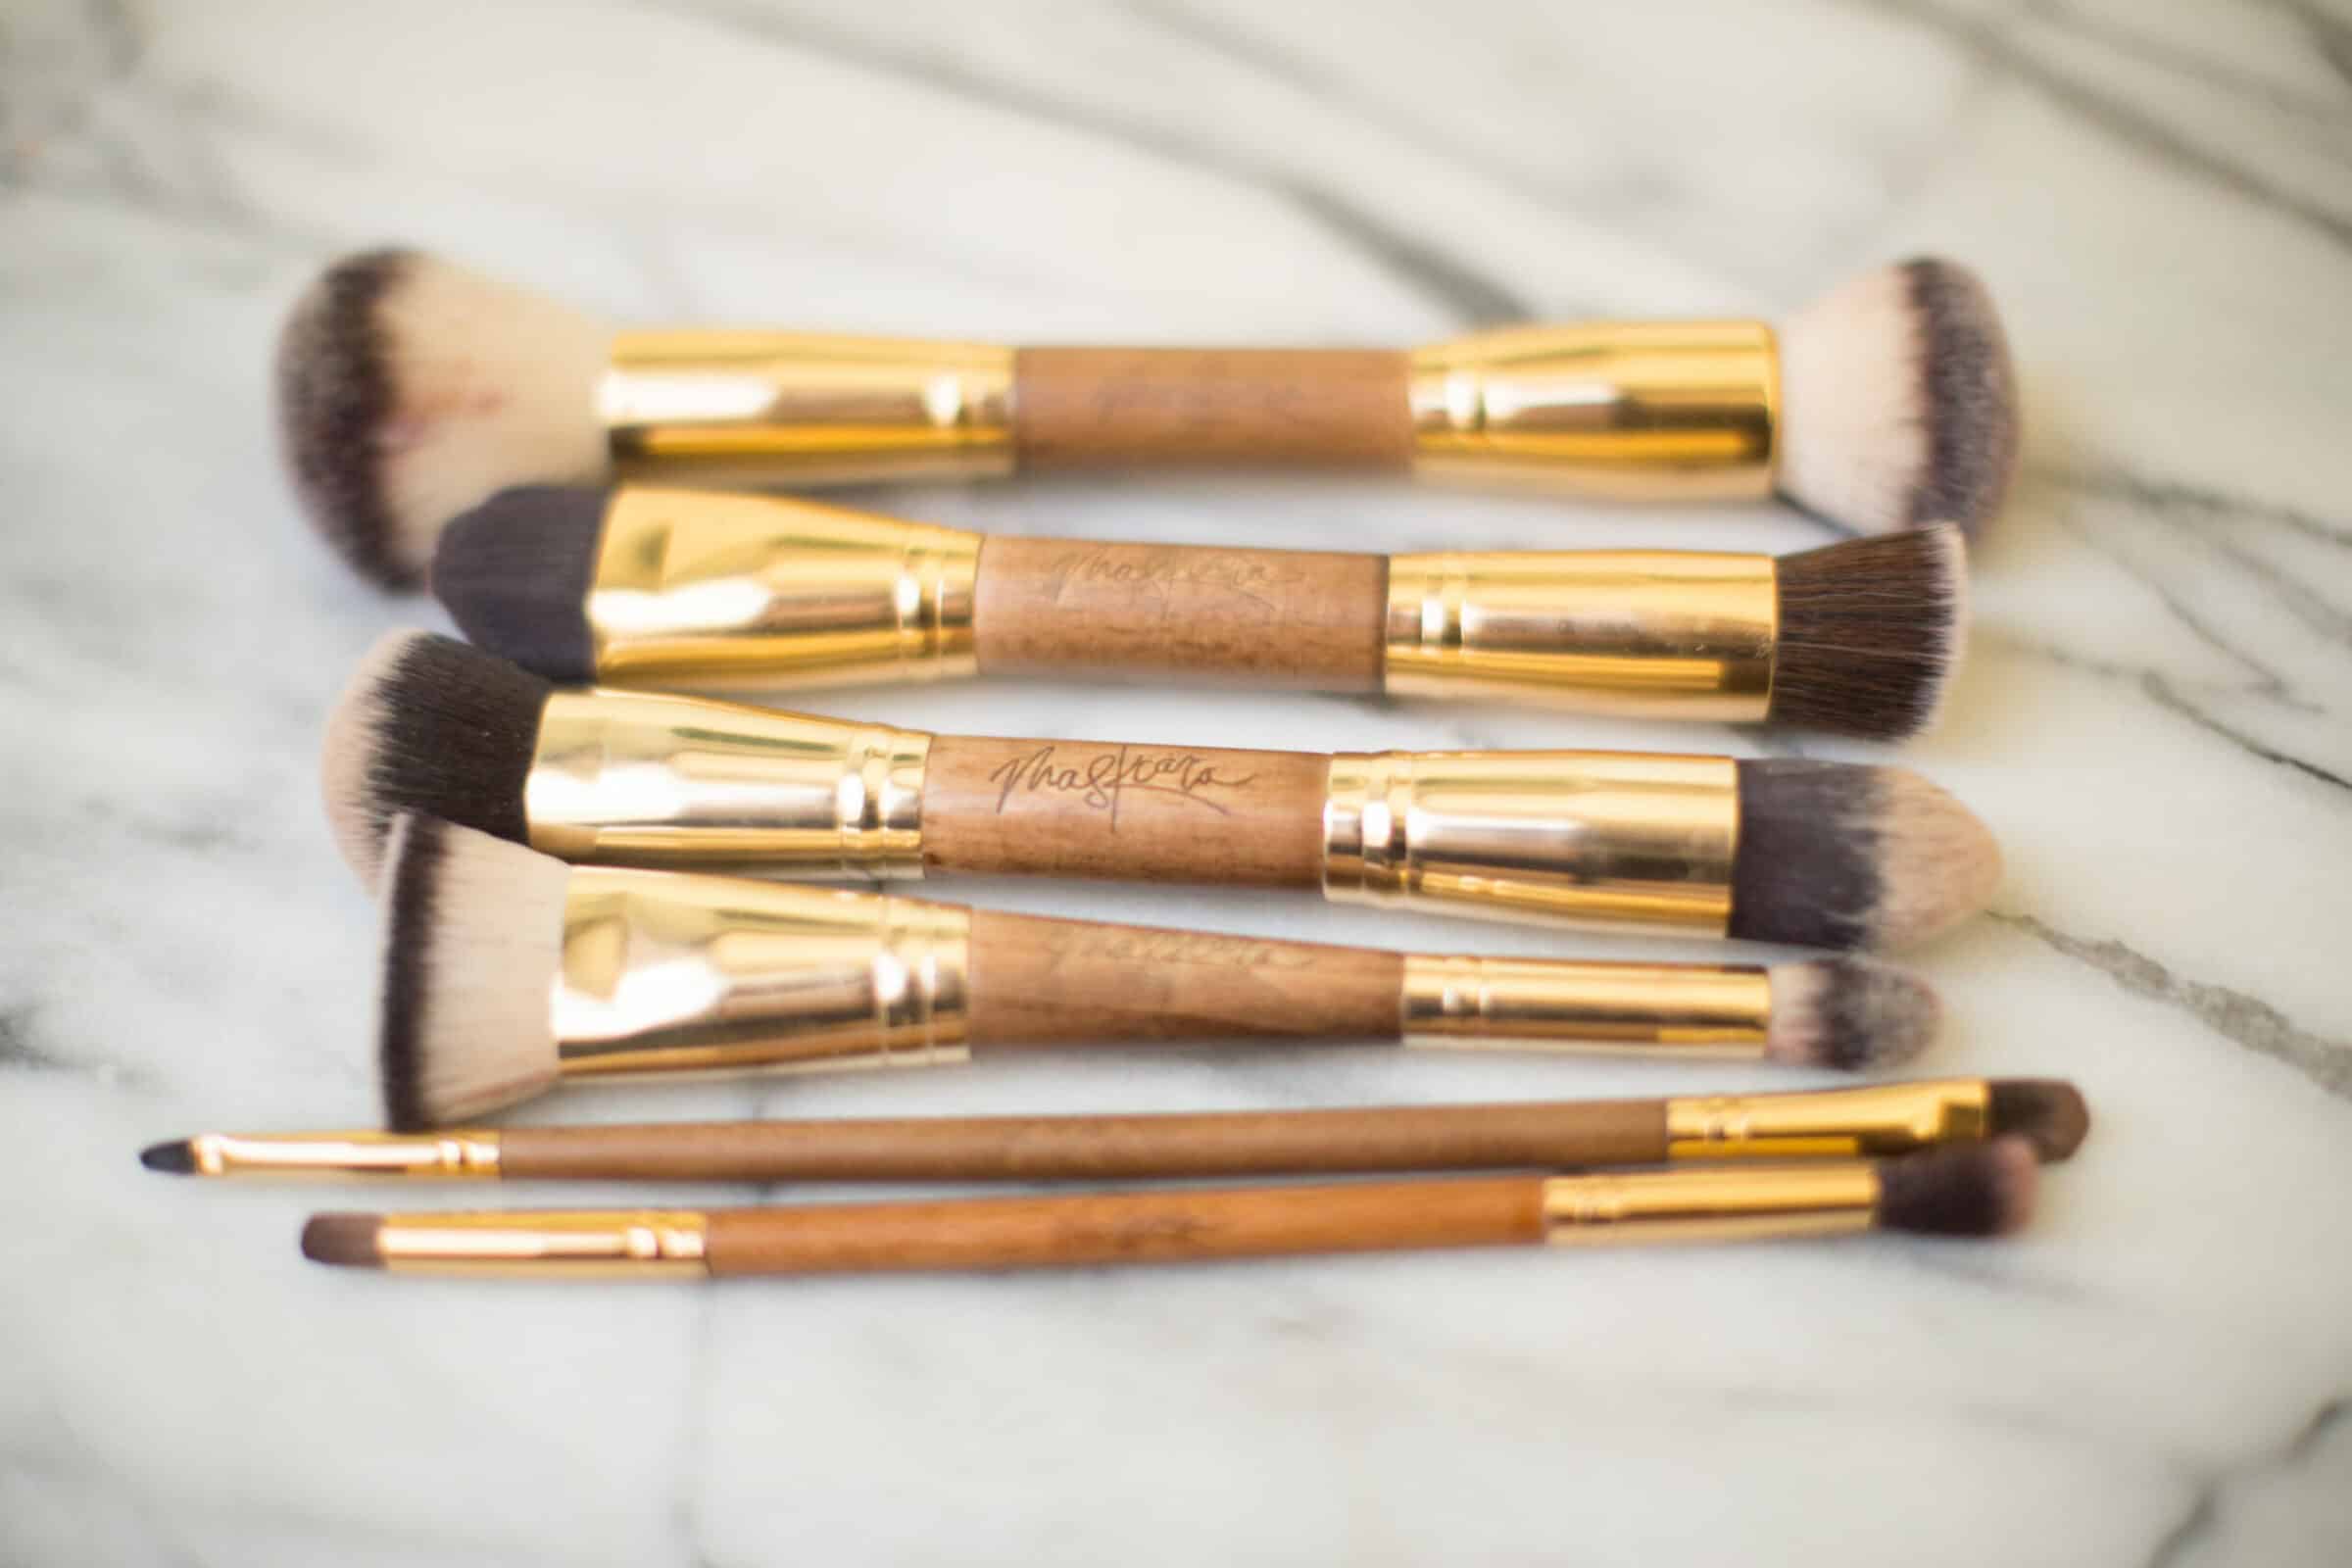 3 simple ways to clean your makeup brushes with www.maskcarabeautygirl.com